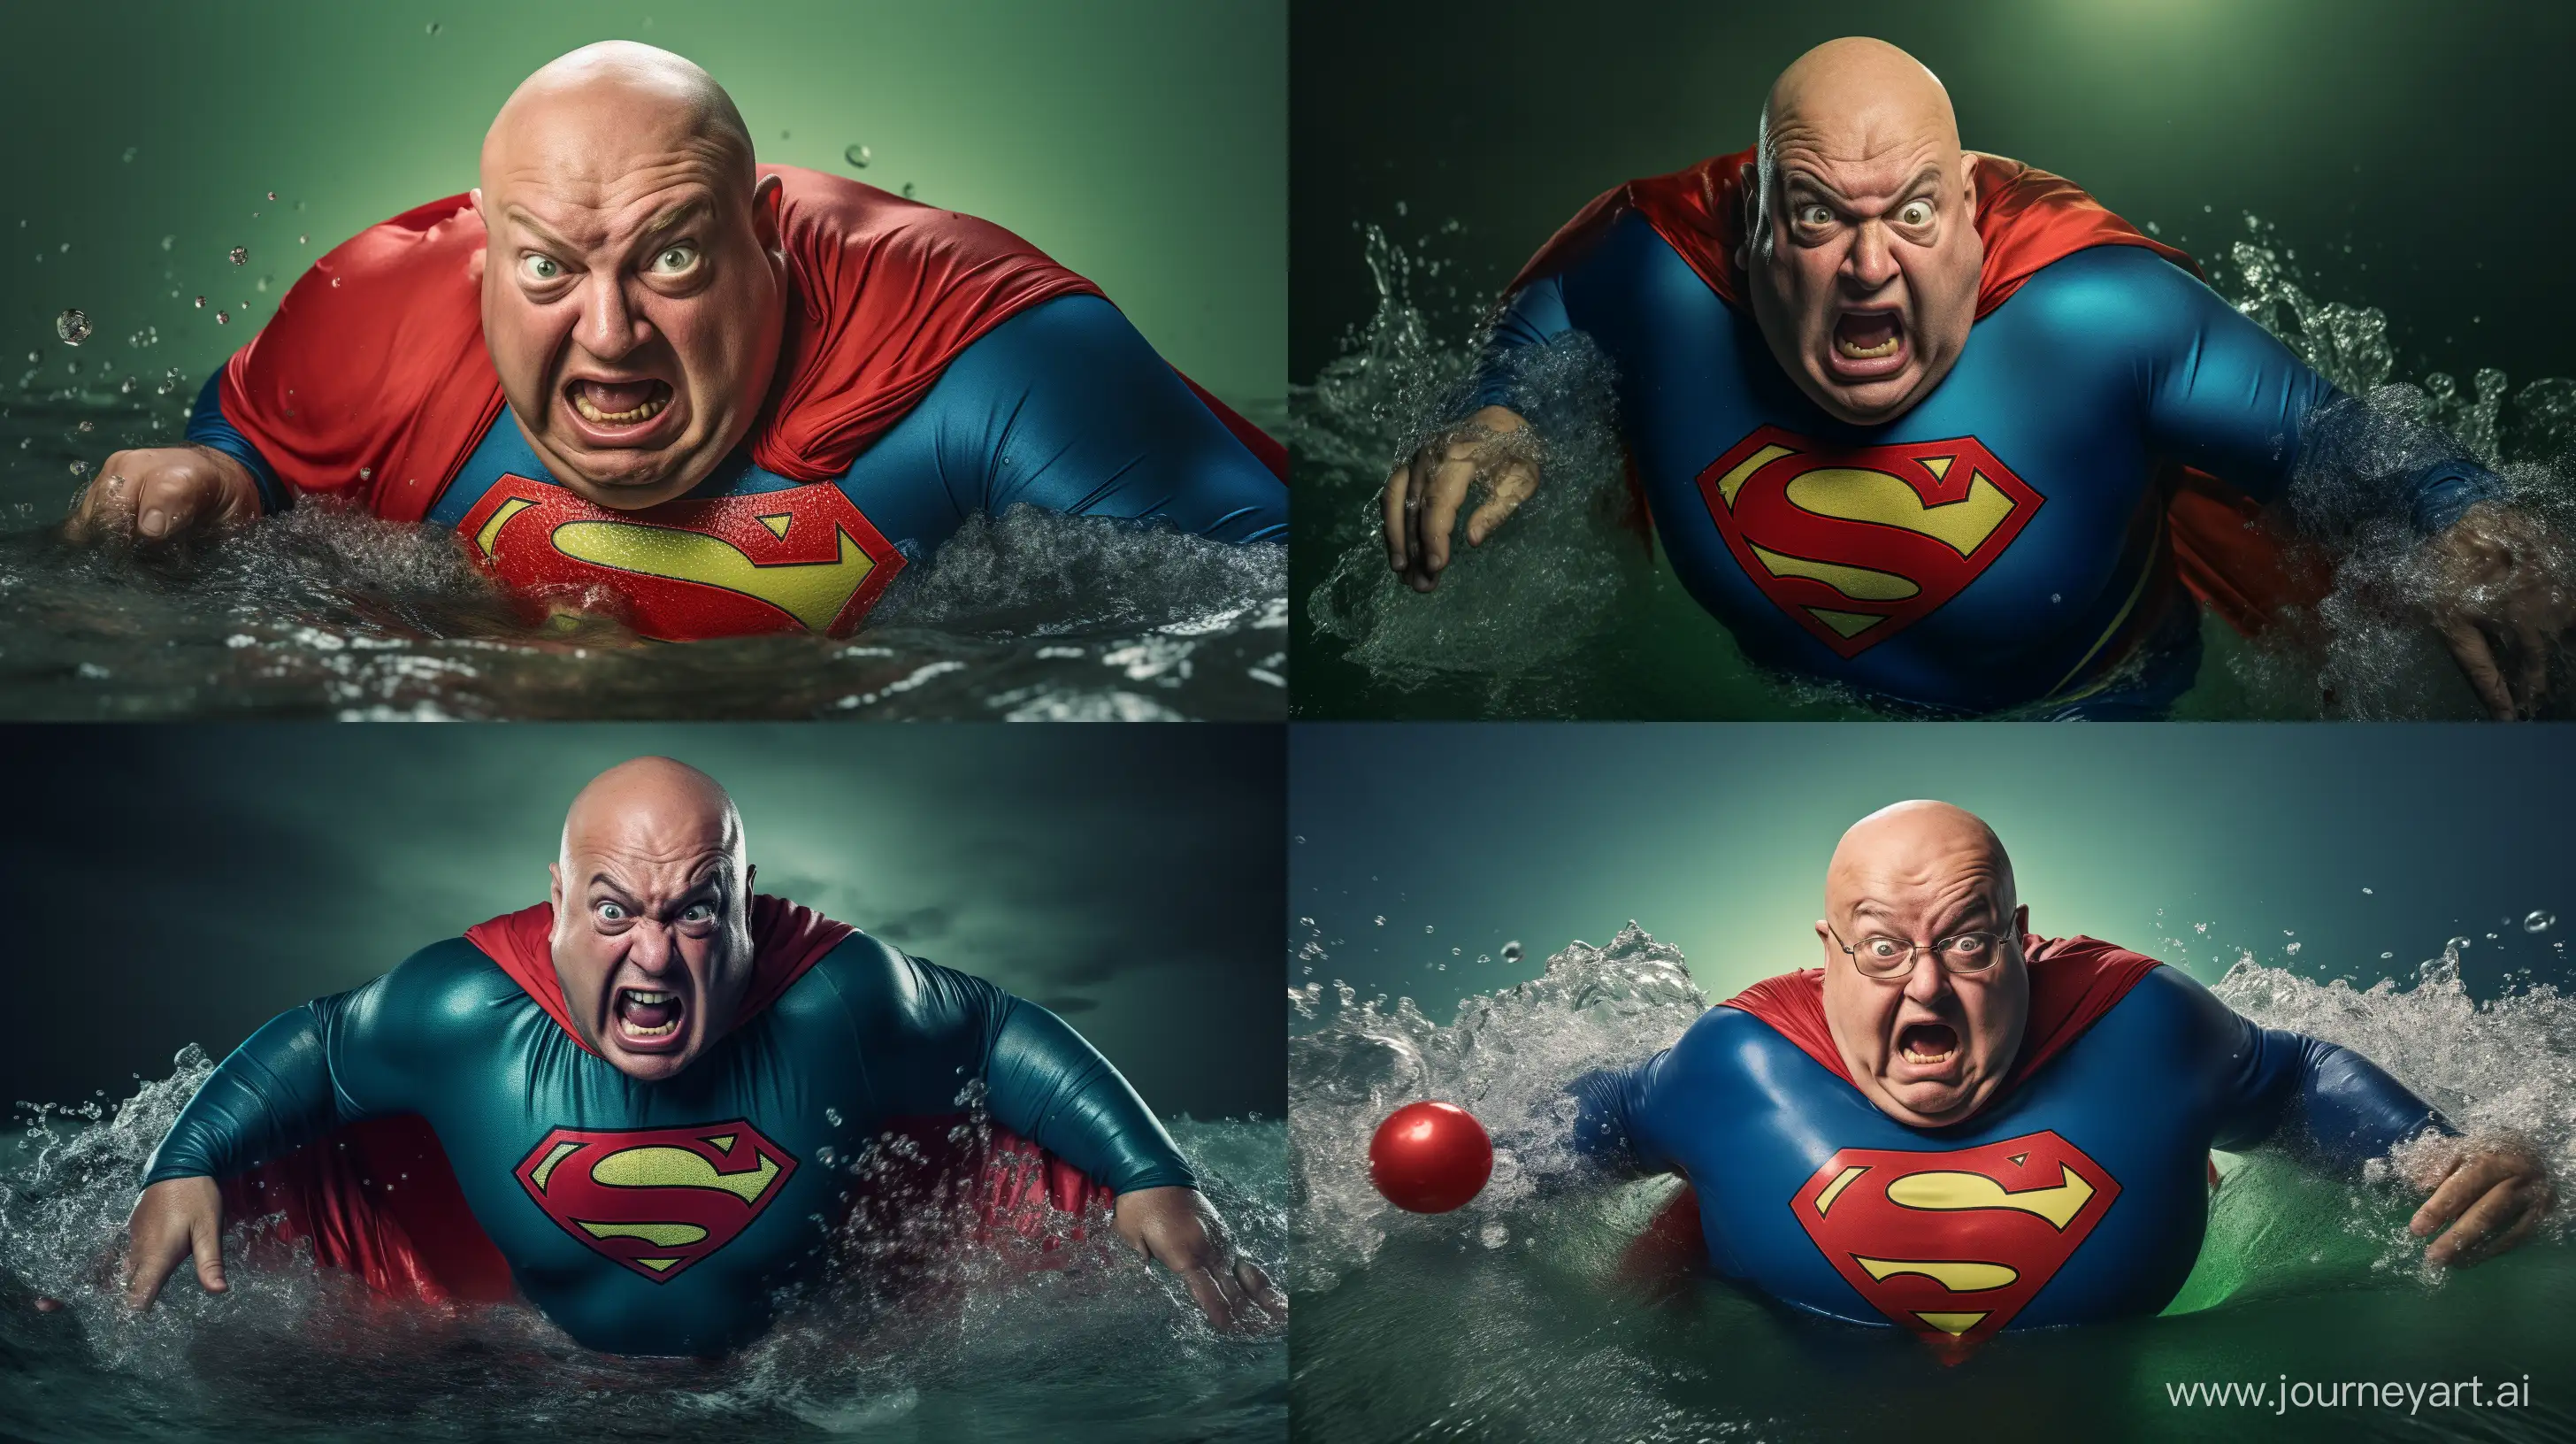 Elderly-Supermans-Furious-Plunge-into-the-Water-with-Illuminated-Ball